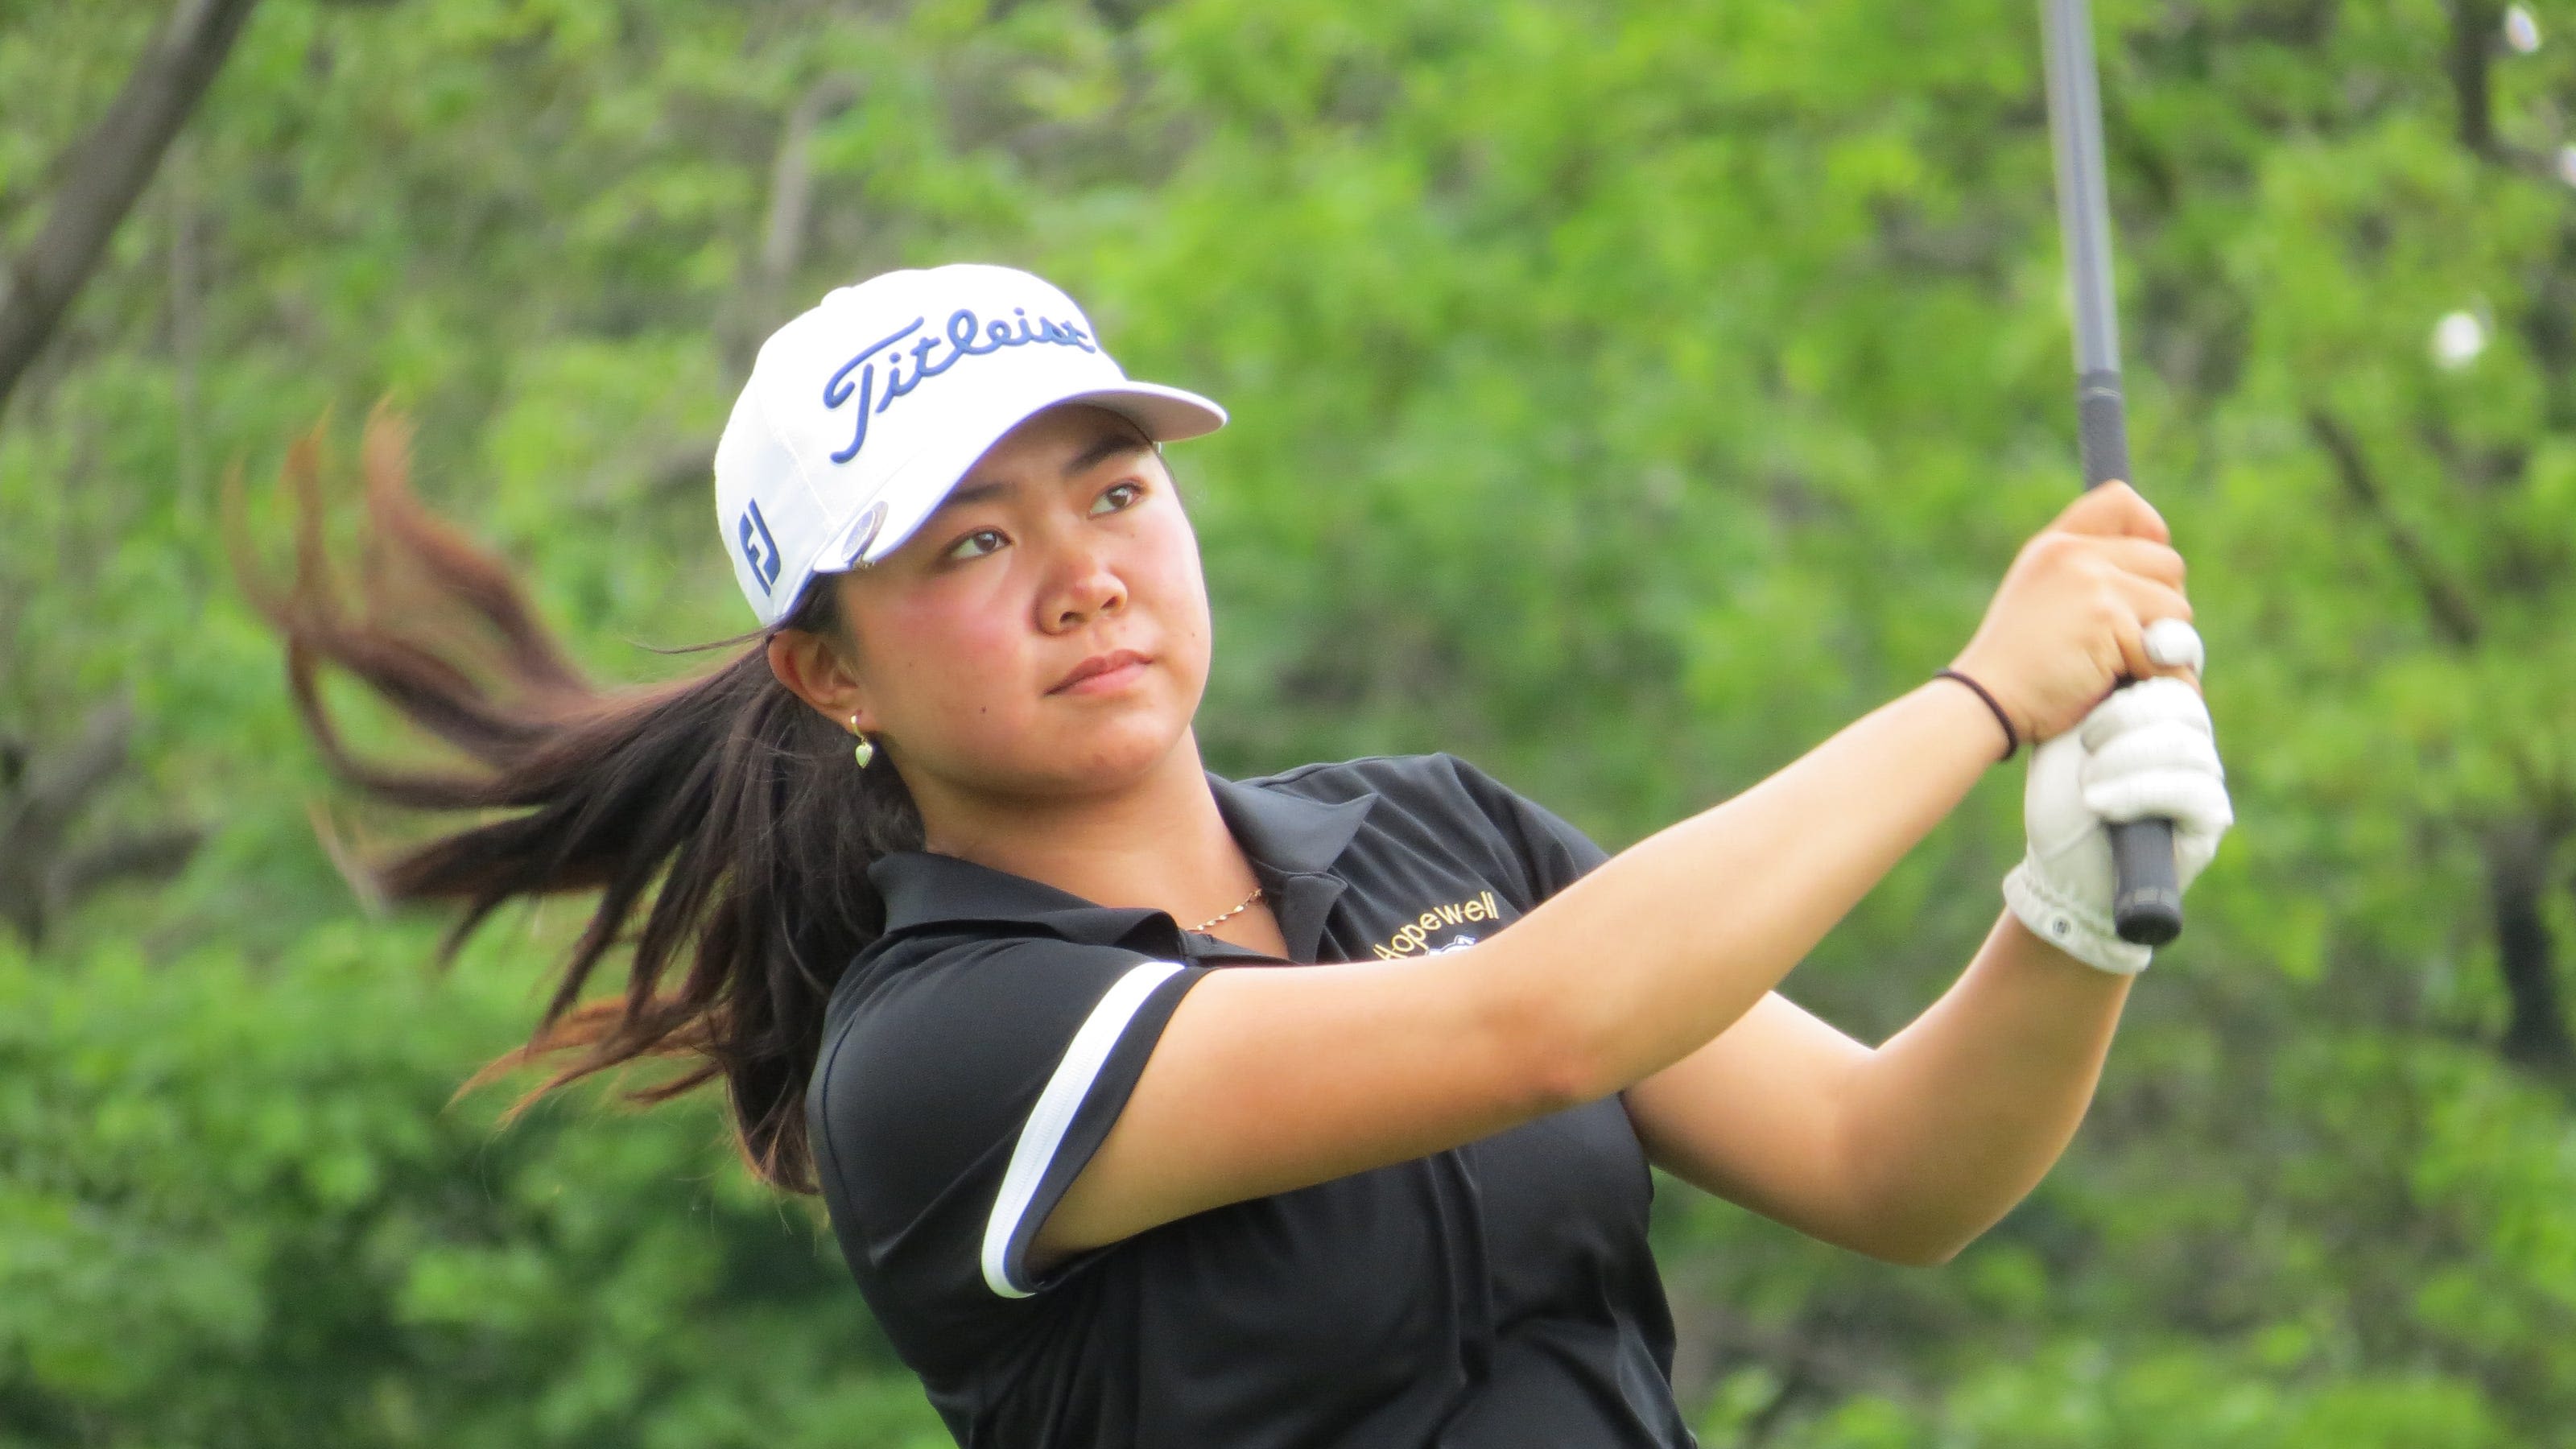 More on Megan Meng: The golfer believed to have made history on SJ course